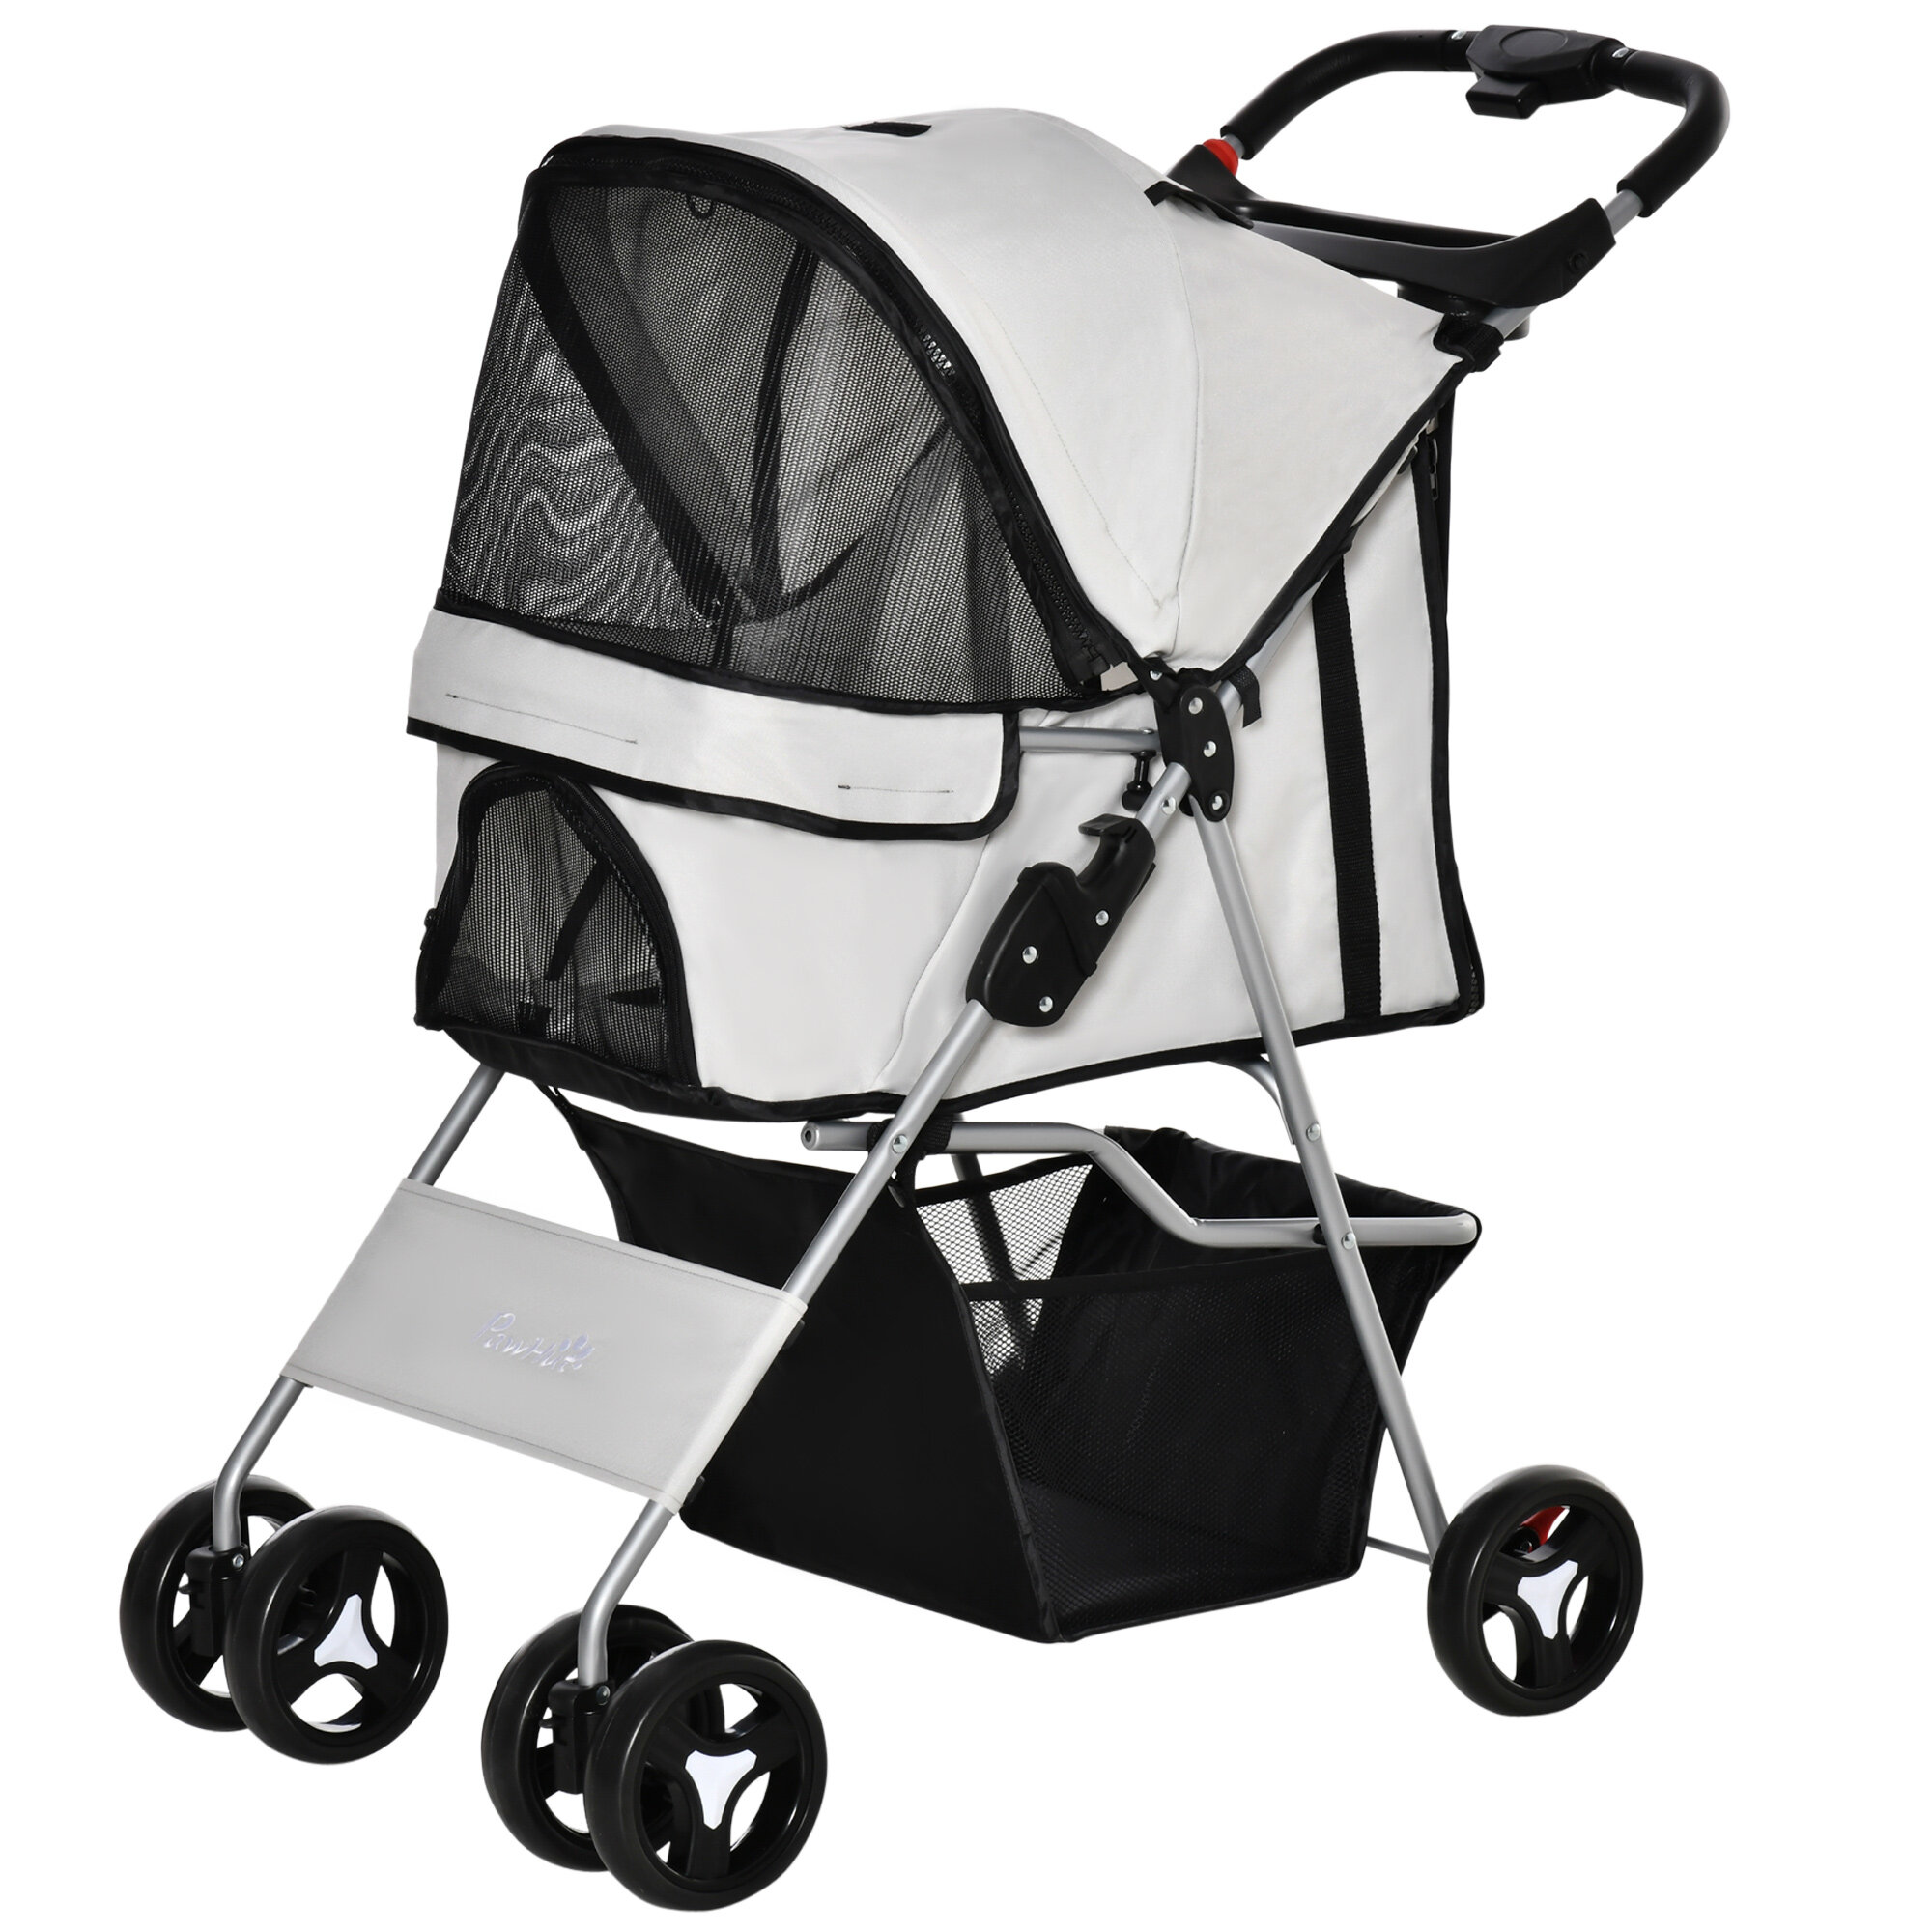 Color : Black Dog Stroller for Large Pet Jogger Stroller for 2 Dogs Breathable Animal Stroller with 4 Wheel and Storage Space Pet Can Easily Walk in 